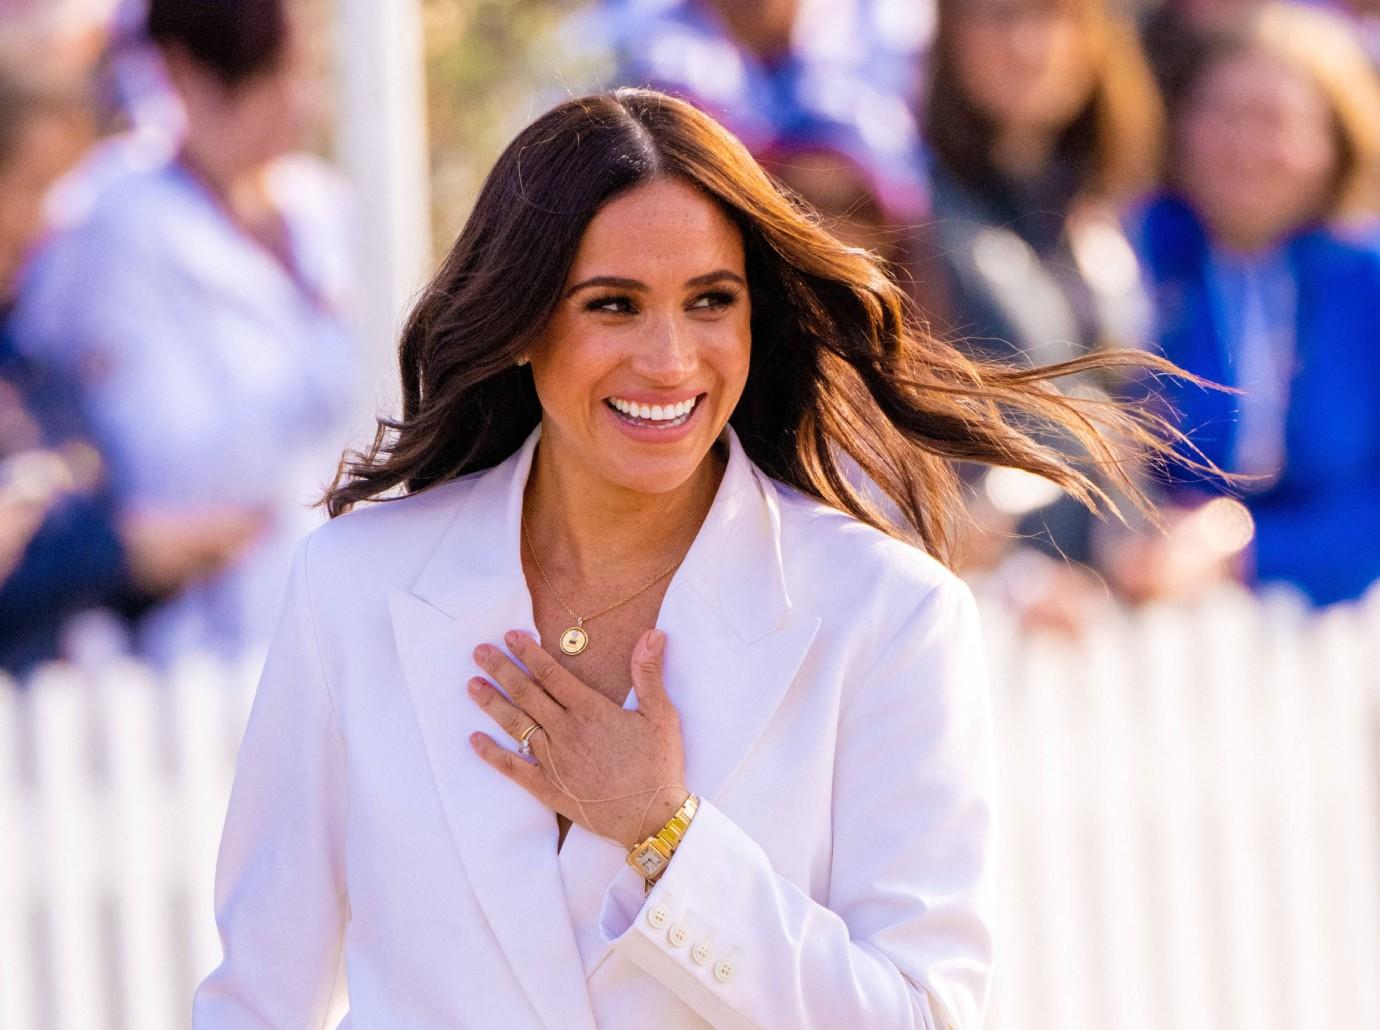 What Is Meghan Markle's Net Worth?